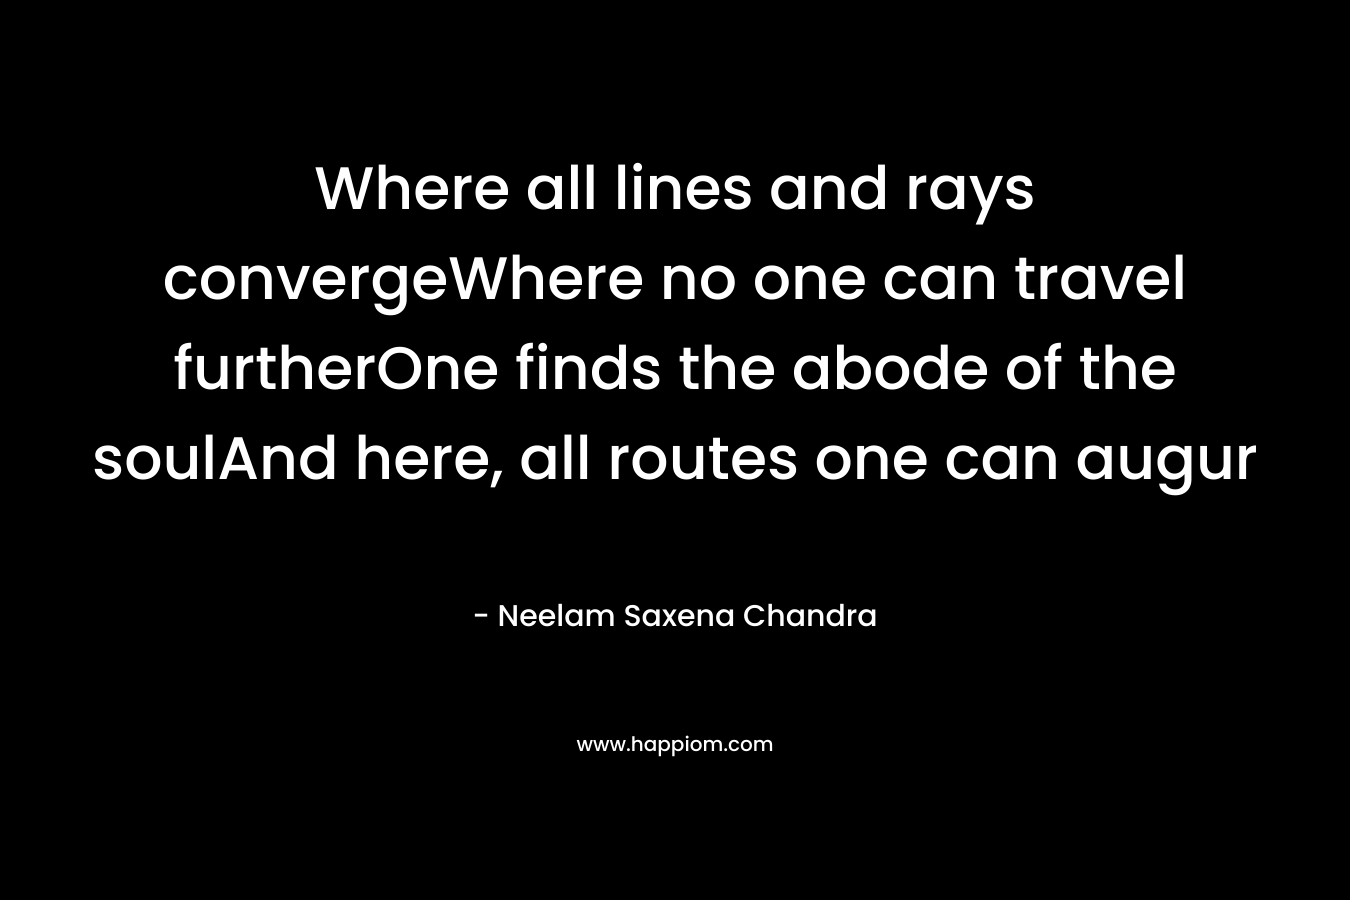 Where all lines and rays convergeWhere no one can travel furtherOne finds the abode of the soulAnd here, all routes one can augur – Neelam Saxena Chandra